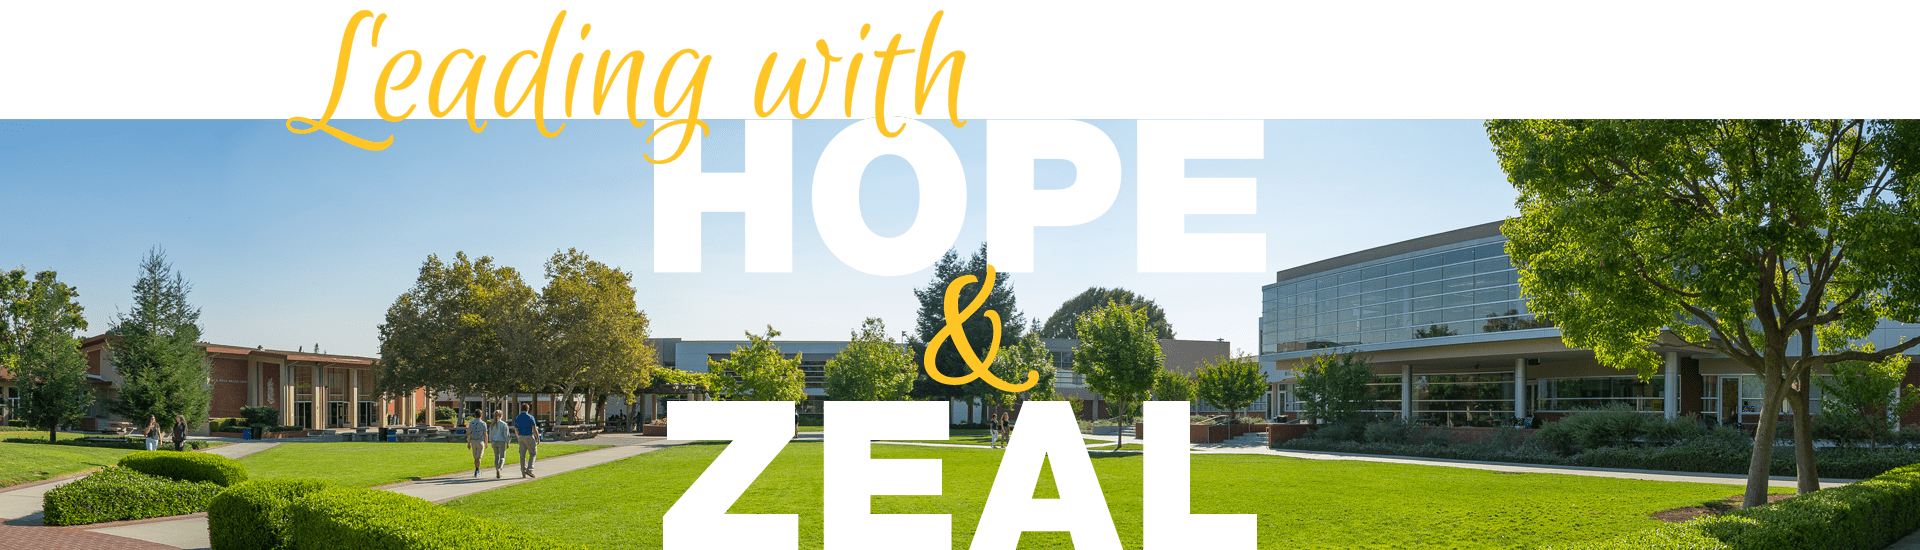 Leading with Hope & Zeal